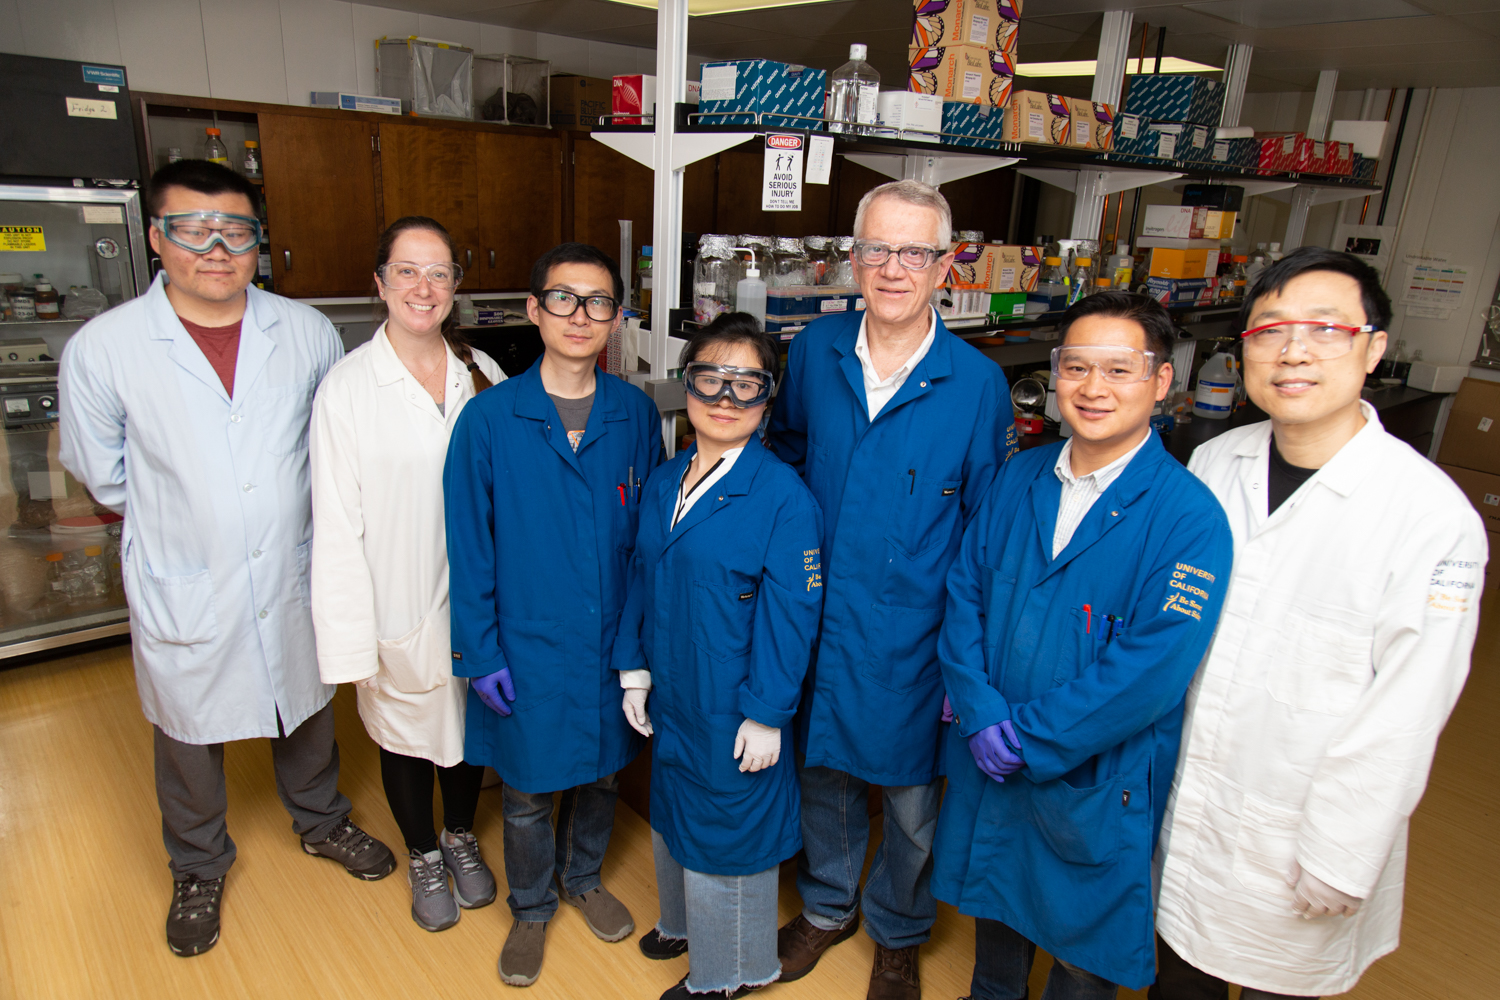 Walter Leal stand with his lab members